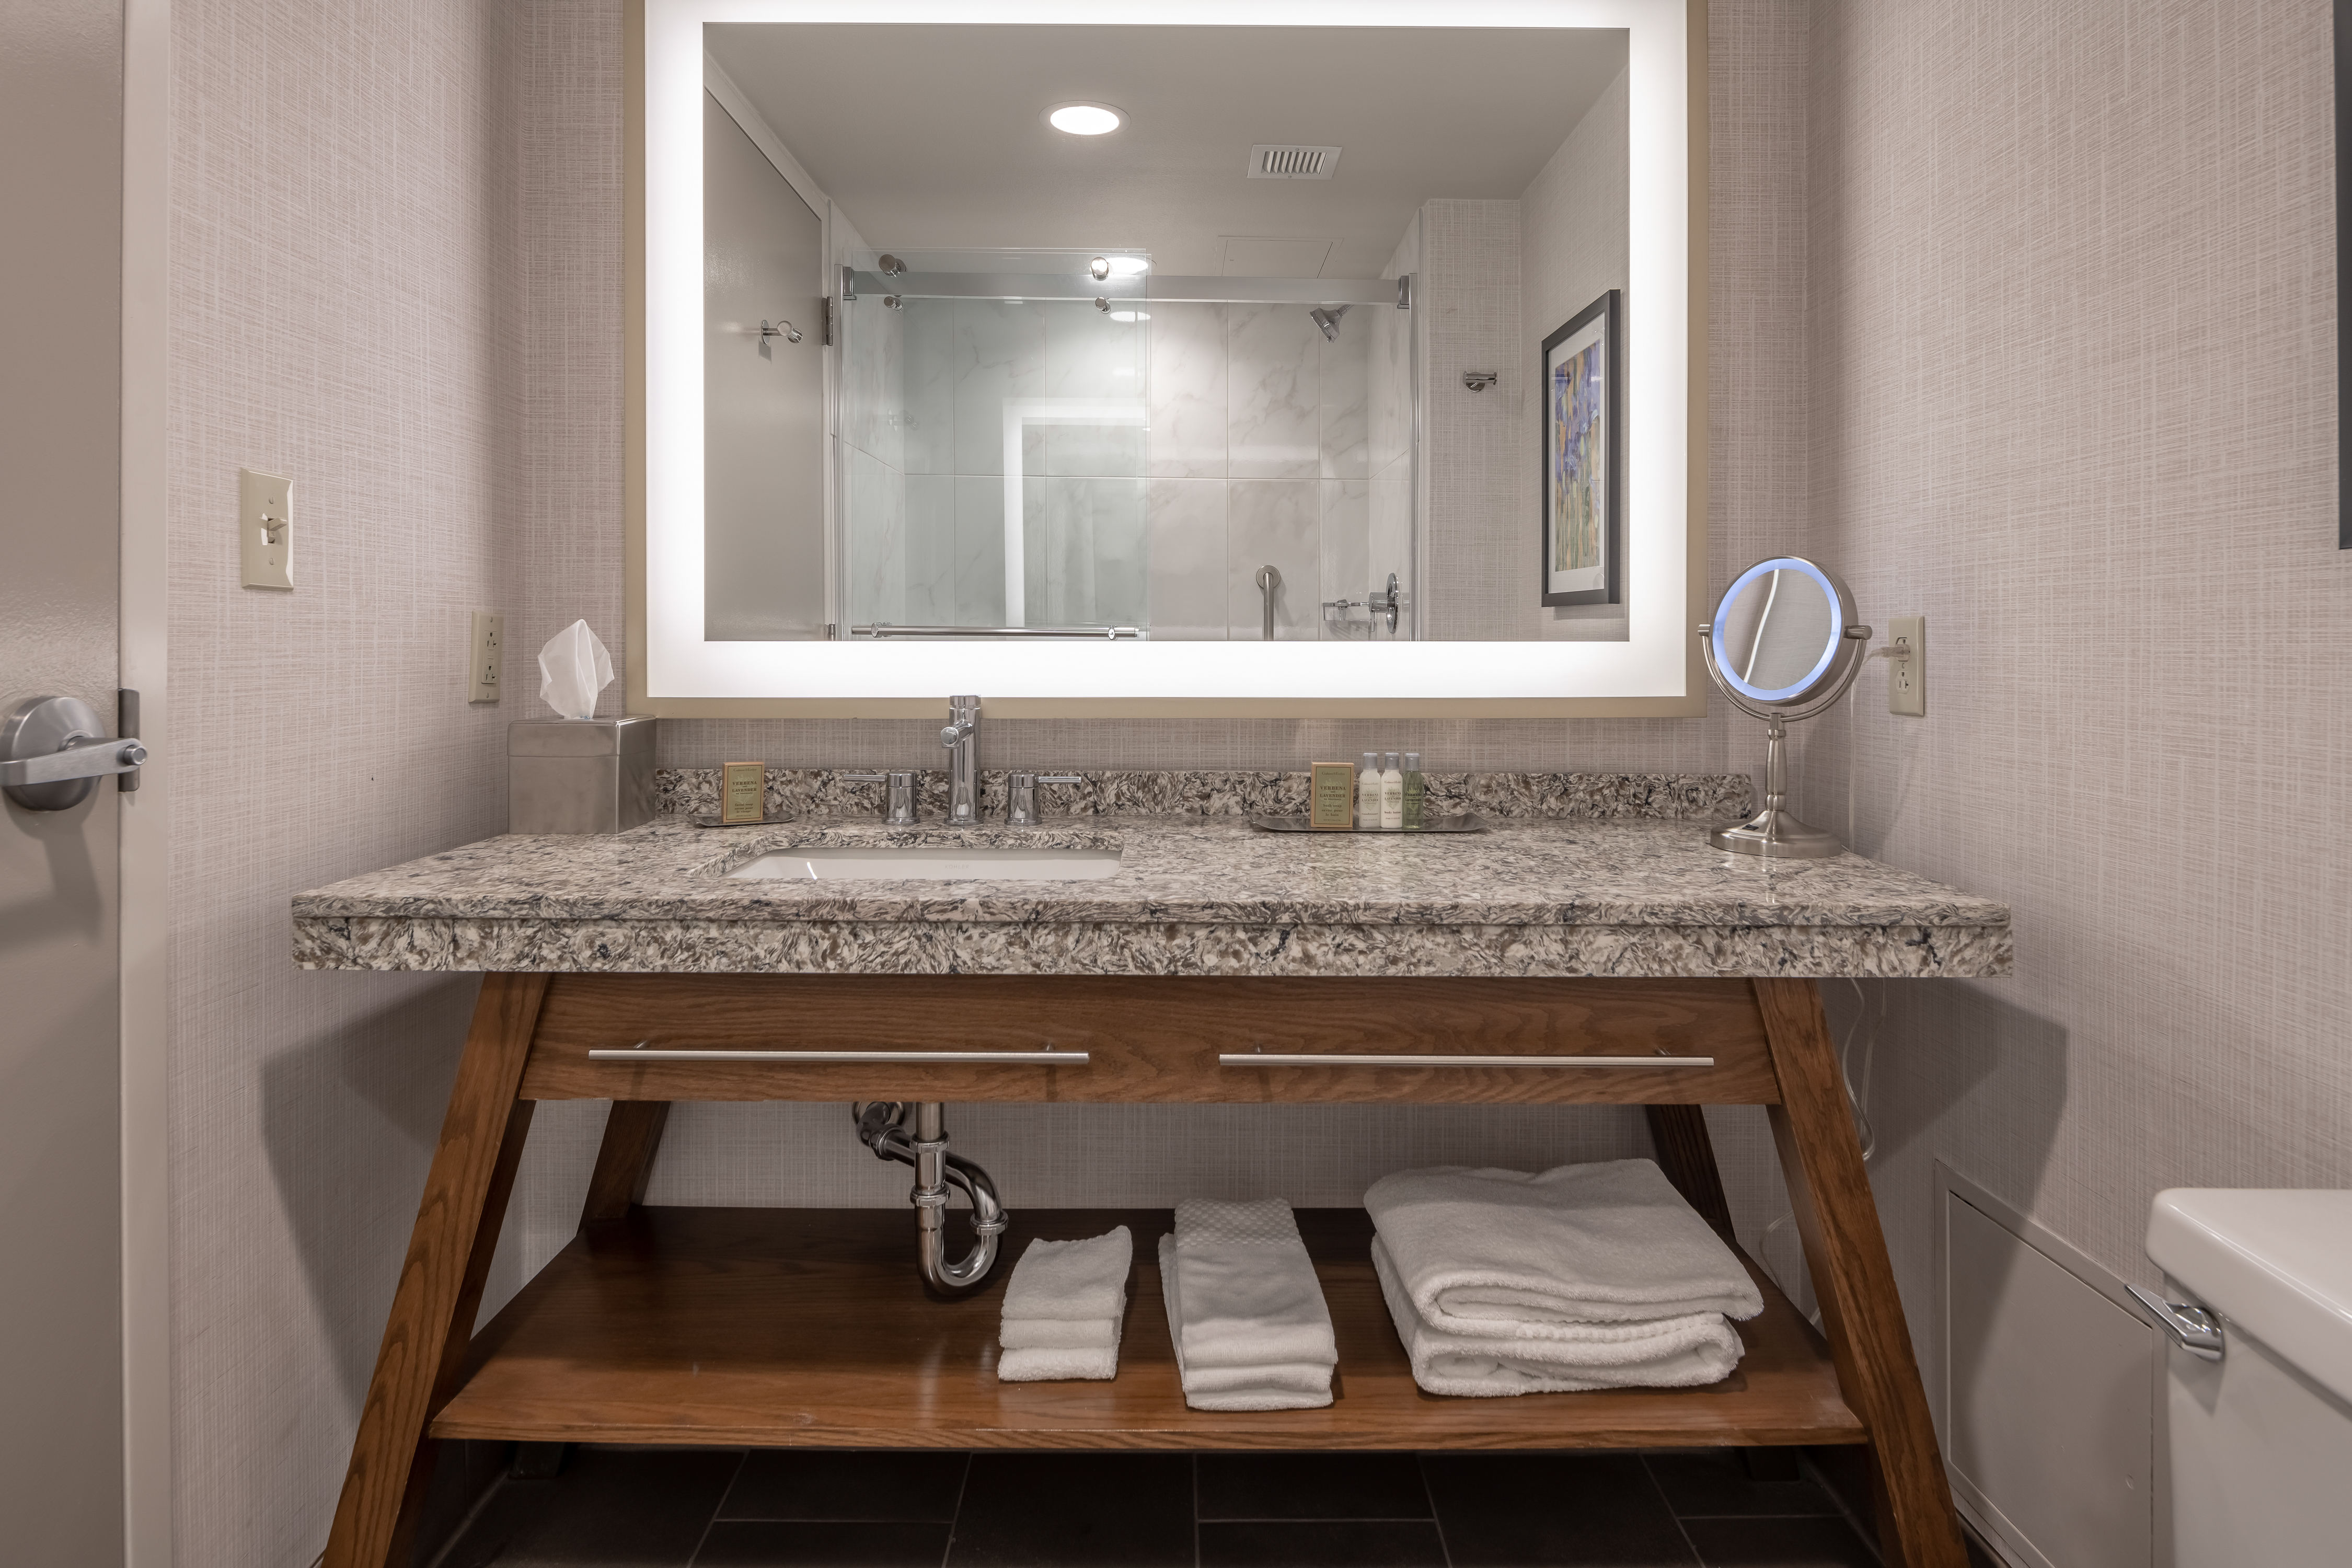 Shower With Glass Door Reflected in Brightly Lit Vanity Mirror Above Sink With Toiletries, Amenities, and Fresh Towels